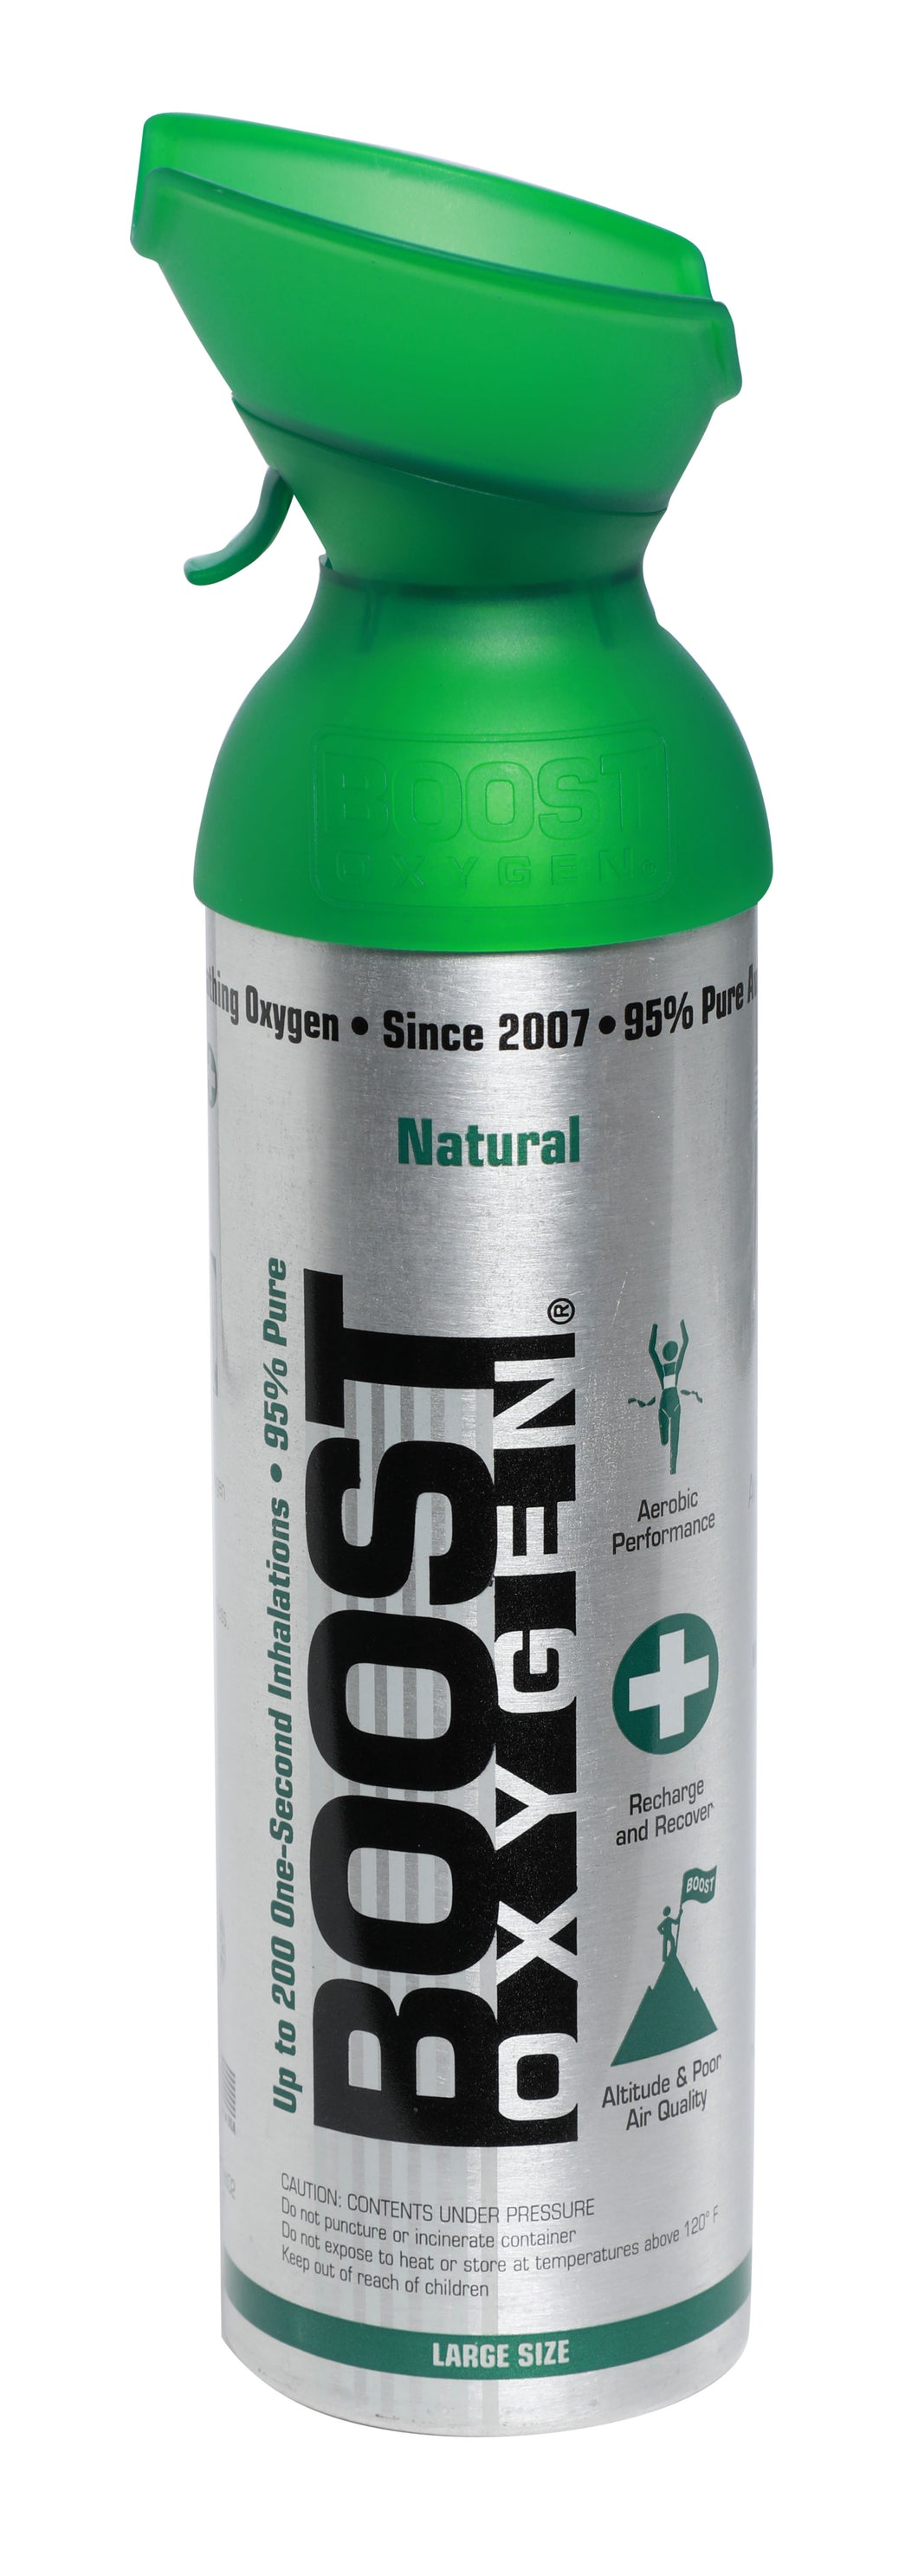 Natural 95% pure supplemental oxygen in a Portable canister, 9 Liters